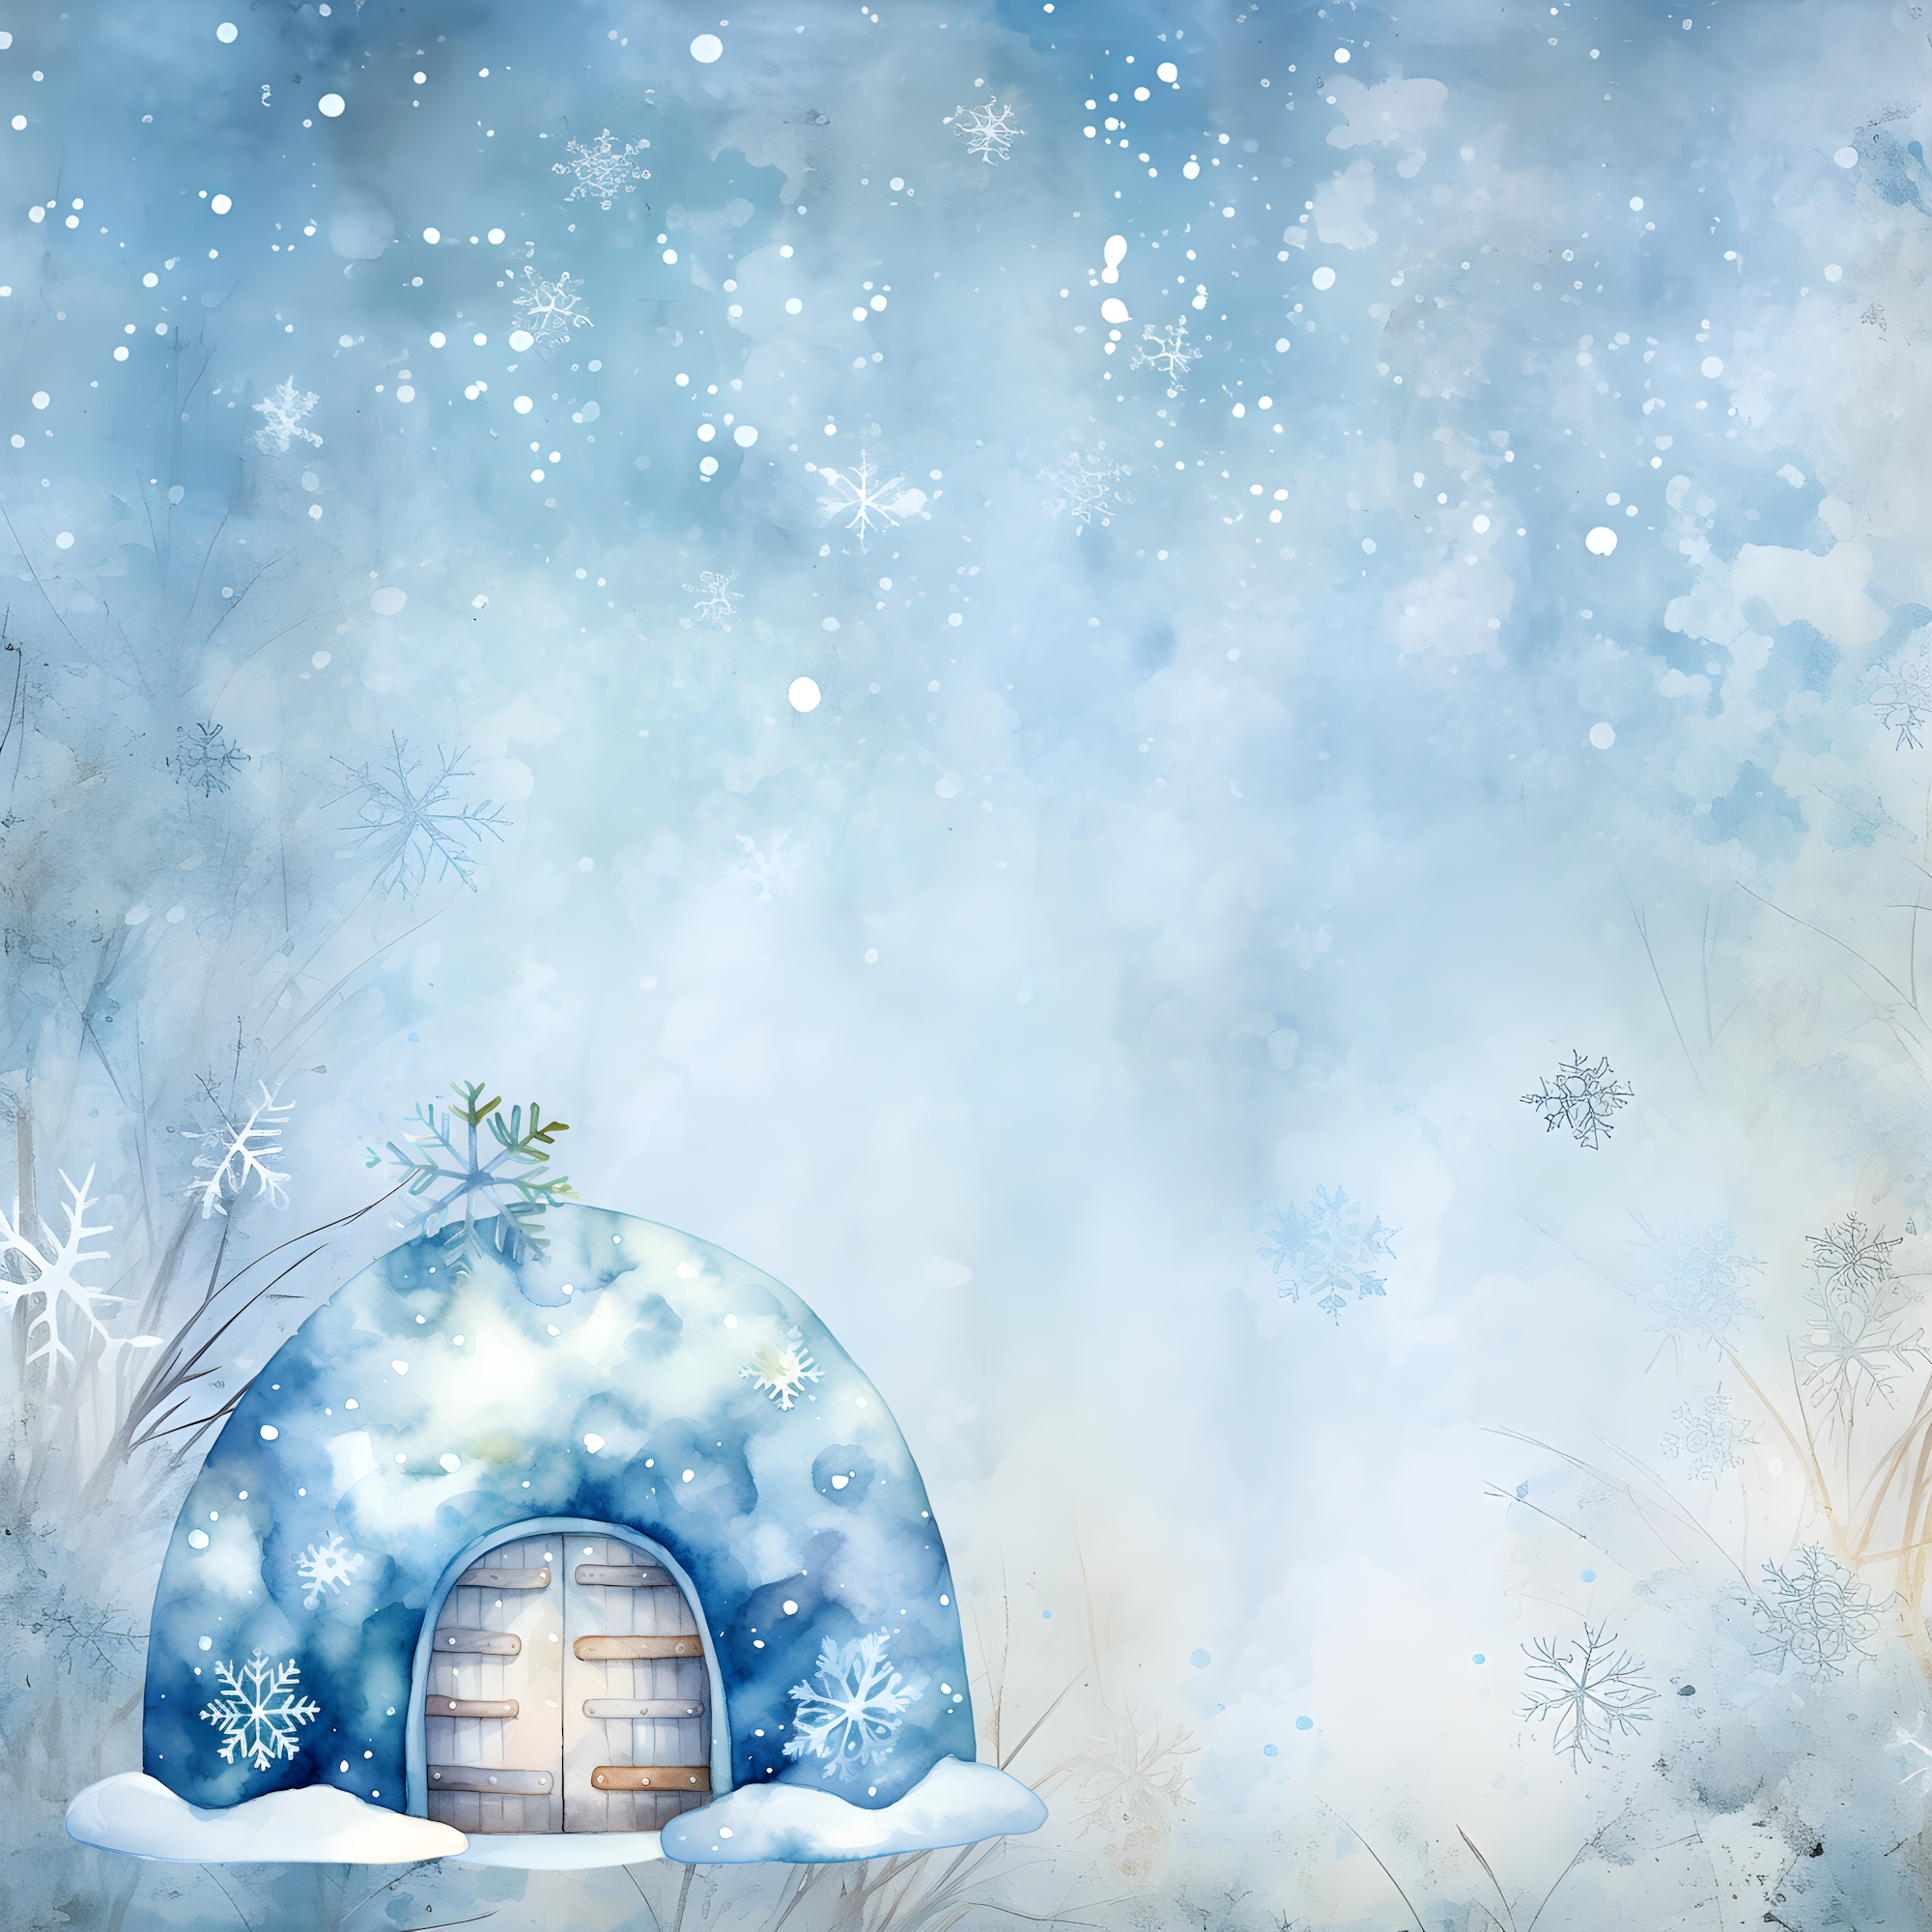 Wonderful Winter Collection Winter Igloo 12 x 12 Double-Sided Scrapbook Paper by SSC Designs